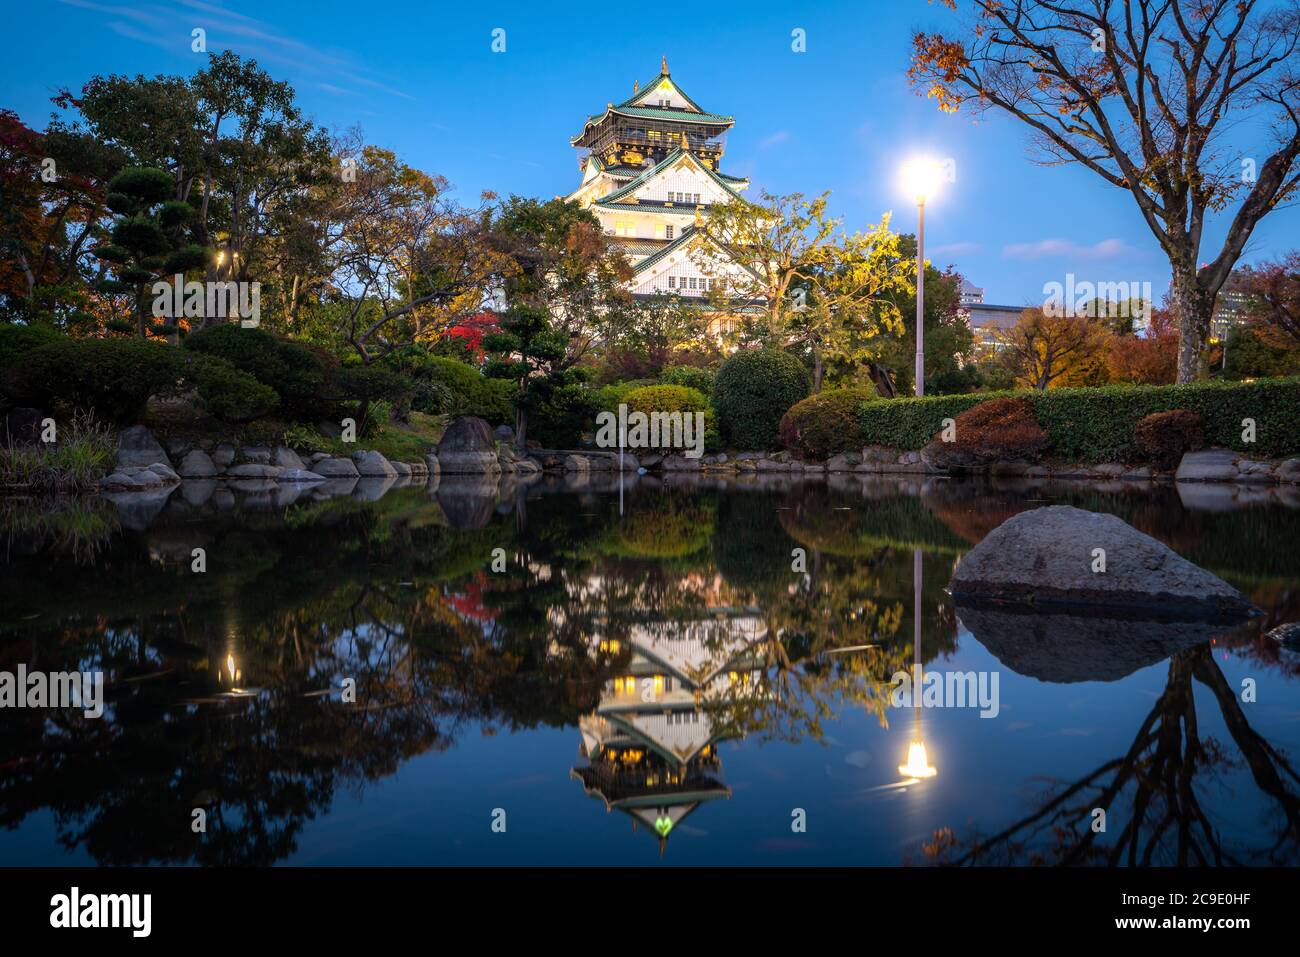 Osaka Castle with Japanese garden and reflection in pond at autumn season at night in Osaka, Japan. Japan tourism, history building, or tradition cult Stock Photo